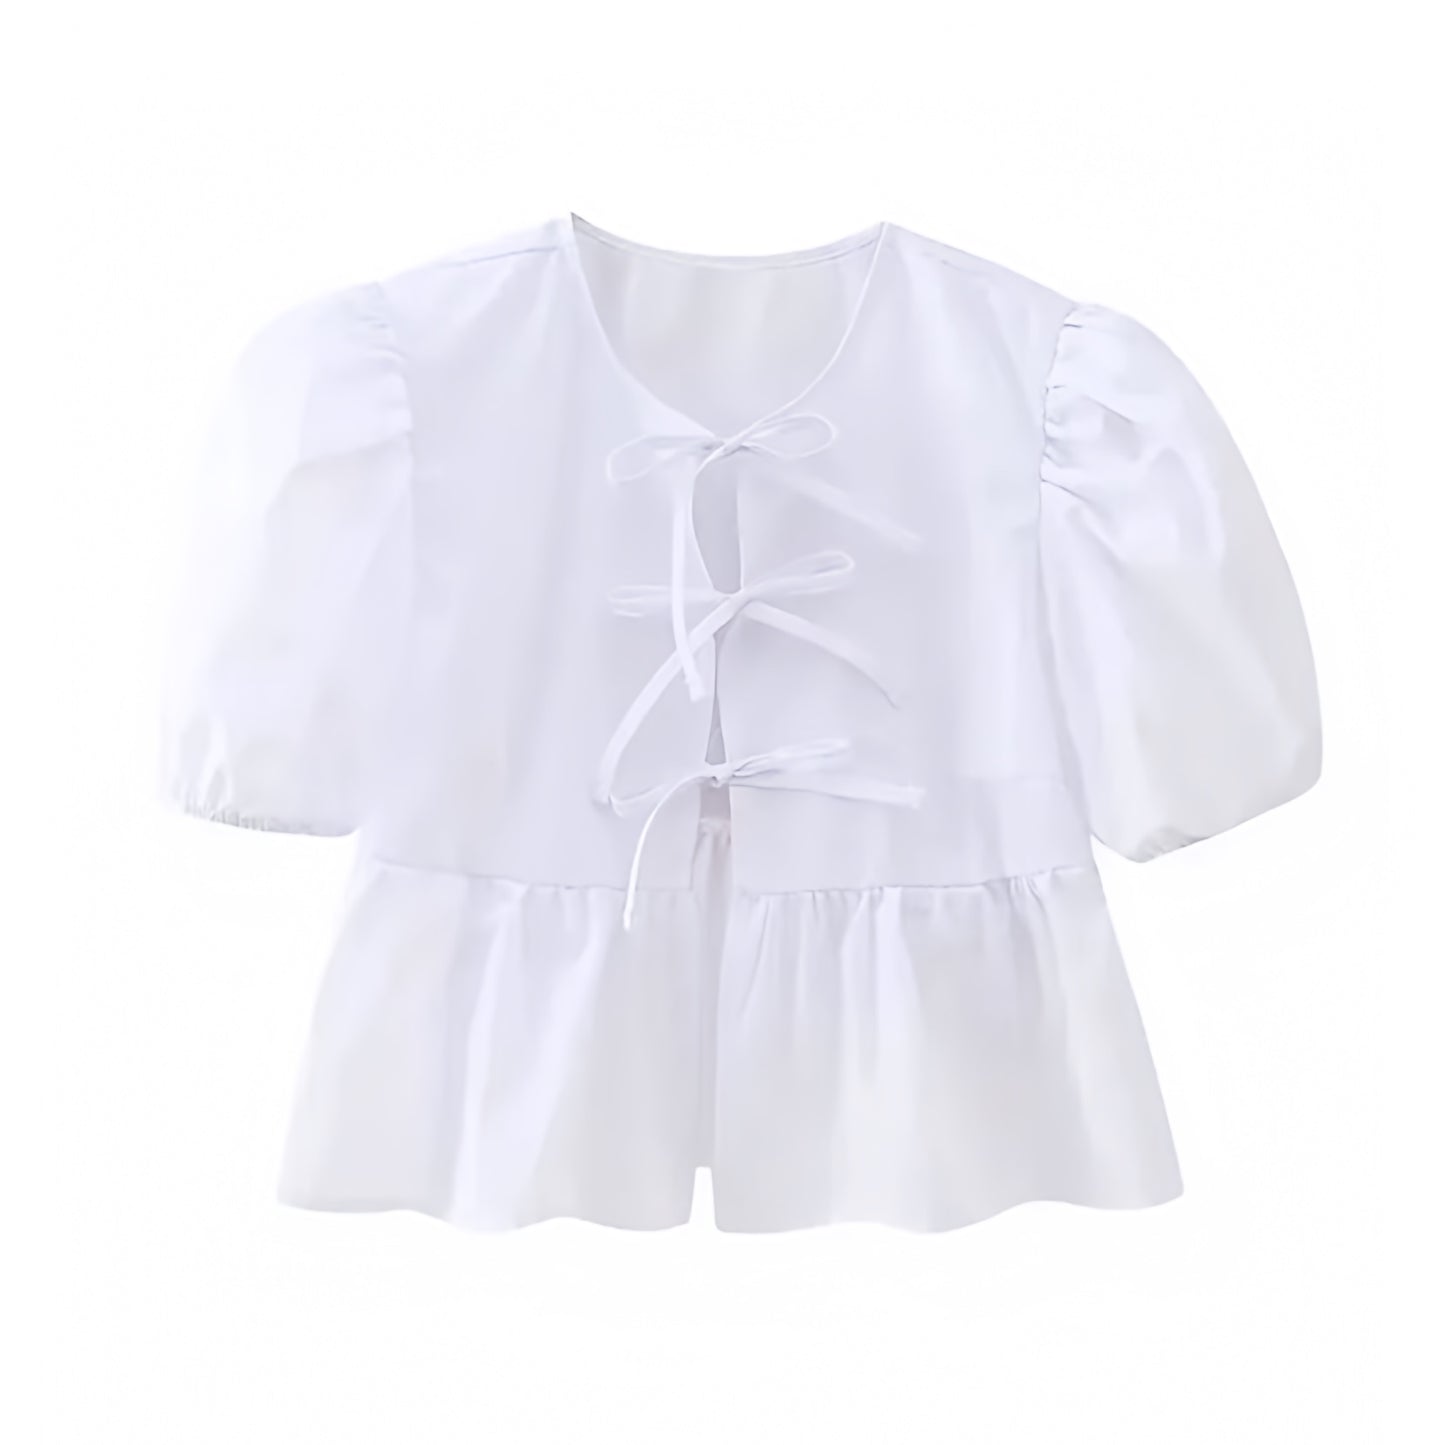 white-ivory-bow-lace-up-round-neck-cut-out-ruffled-short-puff-sleeve-loose-fit-oversized-linen-crop-camisole-top-blouse-t-shirt-baby-tee-women-ladies-chic-trendy-spring-2024-summer-elegant-casual-feminine-preppy-style-coquette-dollette-zara-revolve-aritzia-urban-outfitters-brandy-melville-pacsun-garage-altard-state